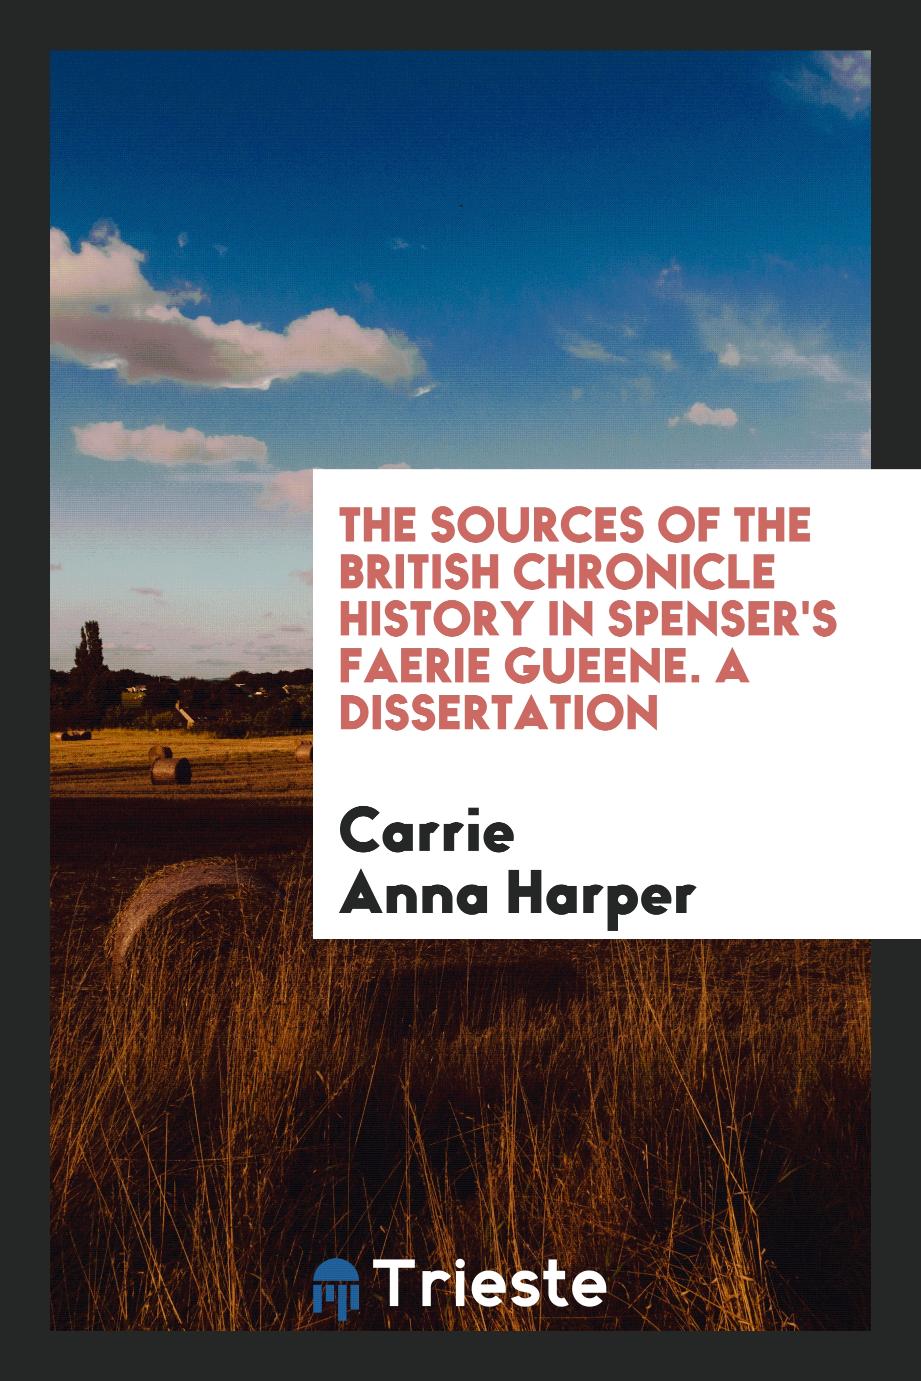 The Sources of The British Chronicle History in Spenser's Faerie Gueene. A Dissertation